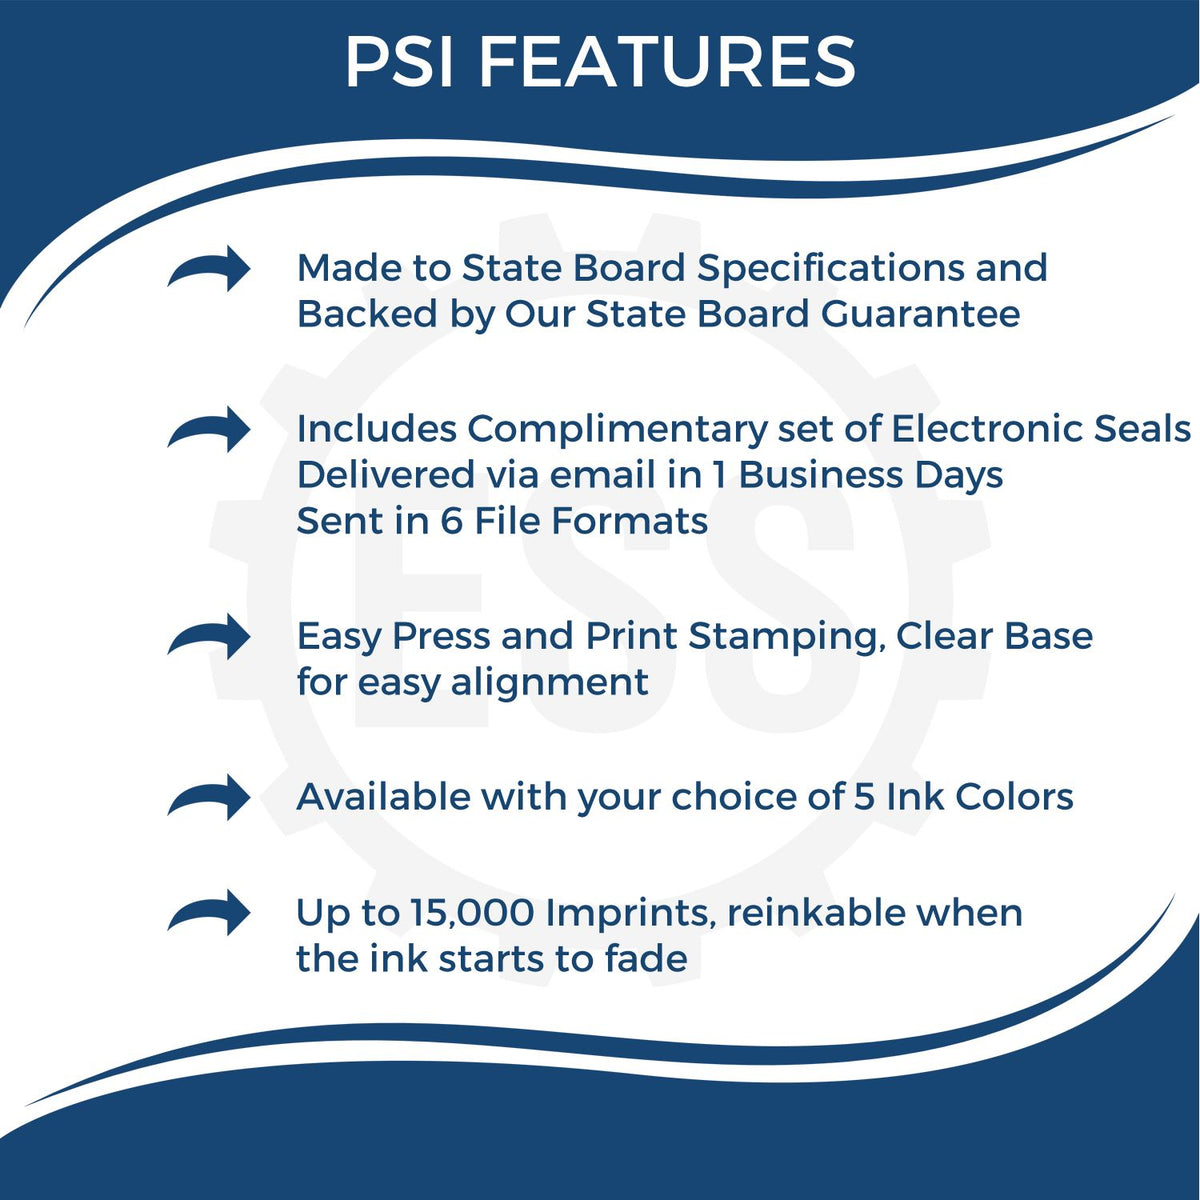 A picture of an infographic highlighting the selling points for the PSI Kentucky Notary Stamp